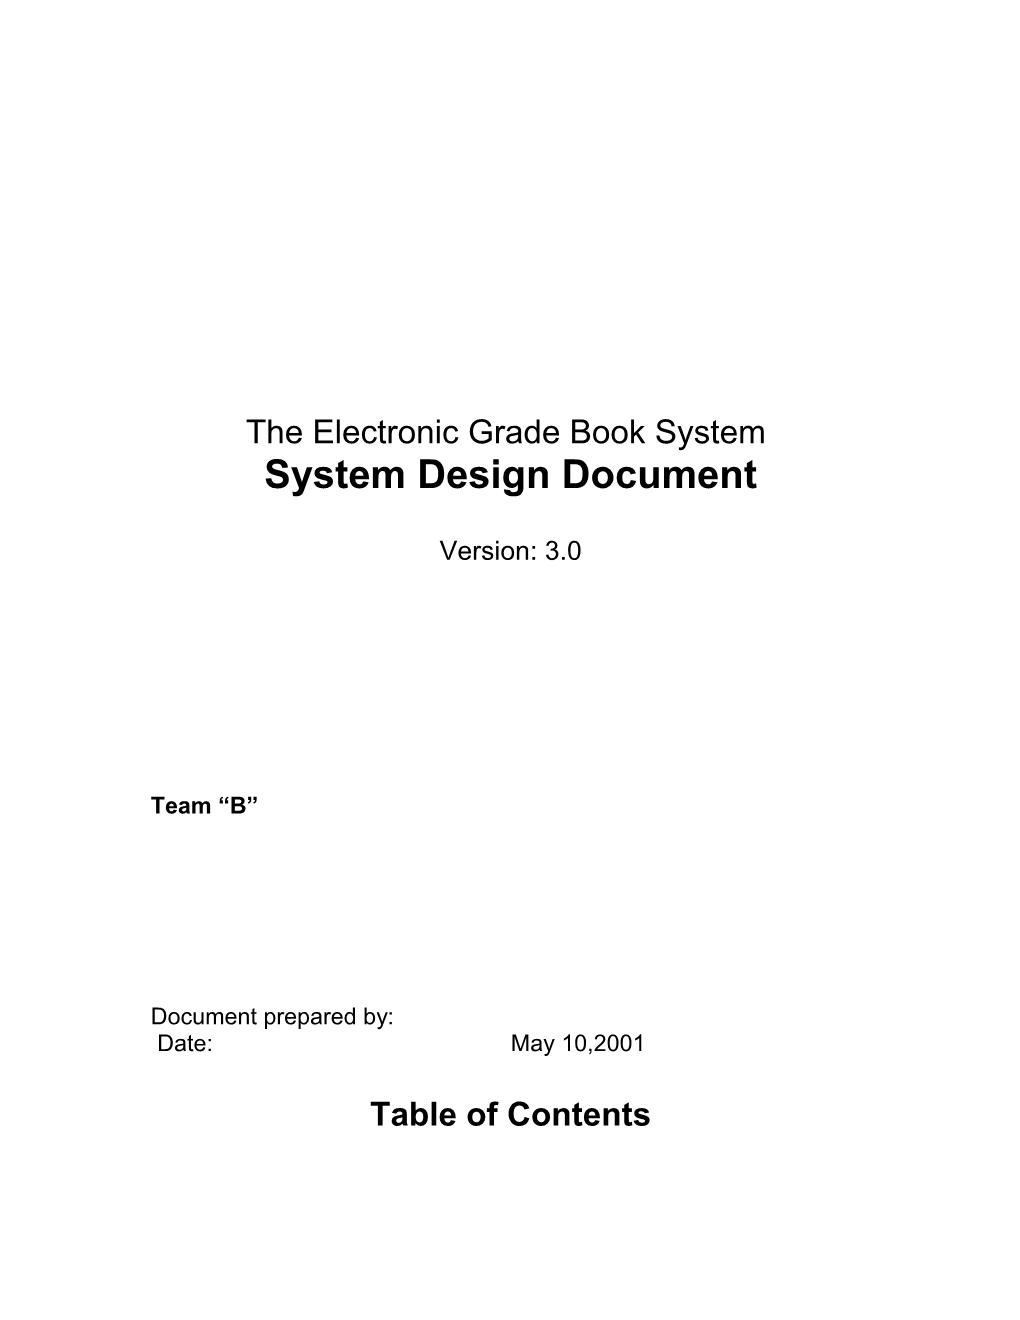 The Electronic Grade Book System